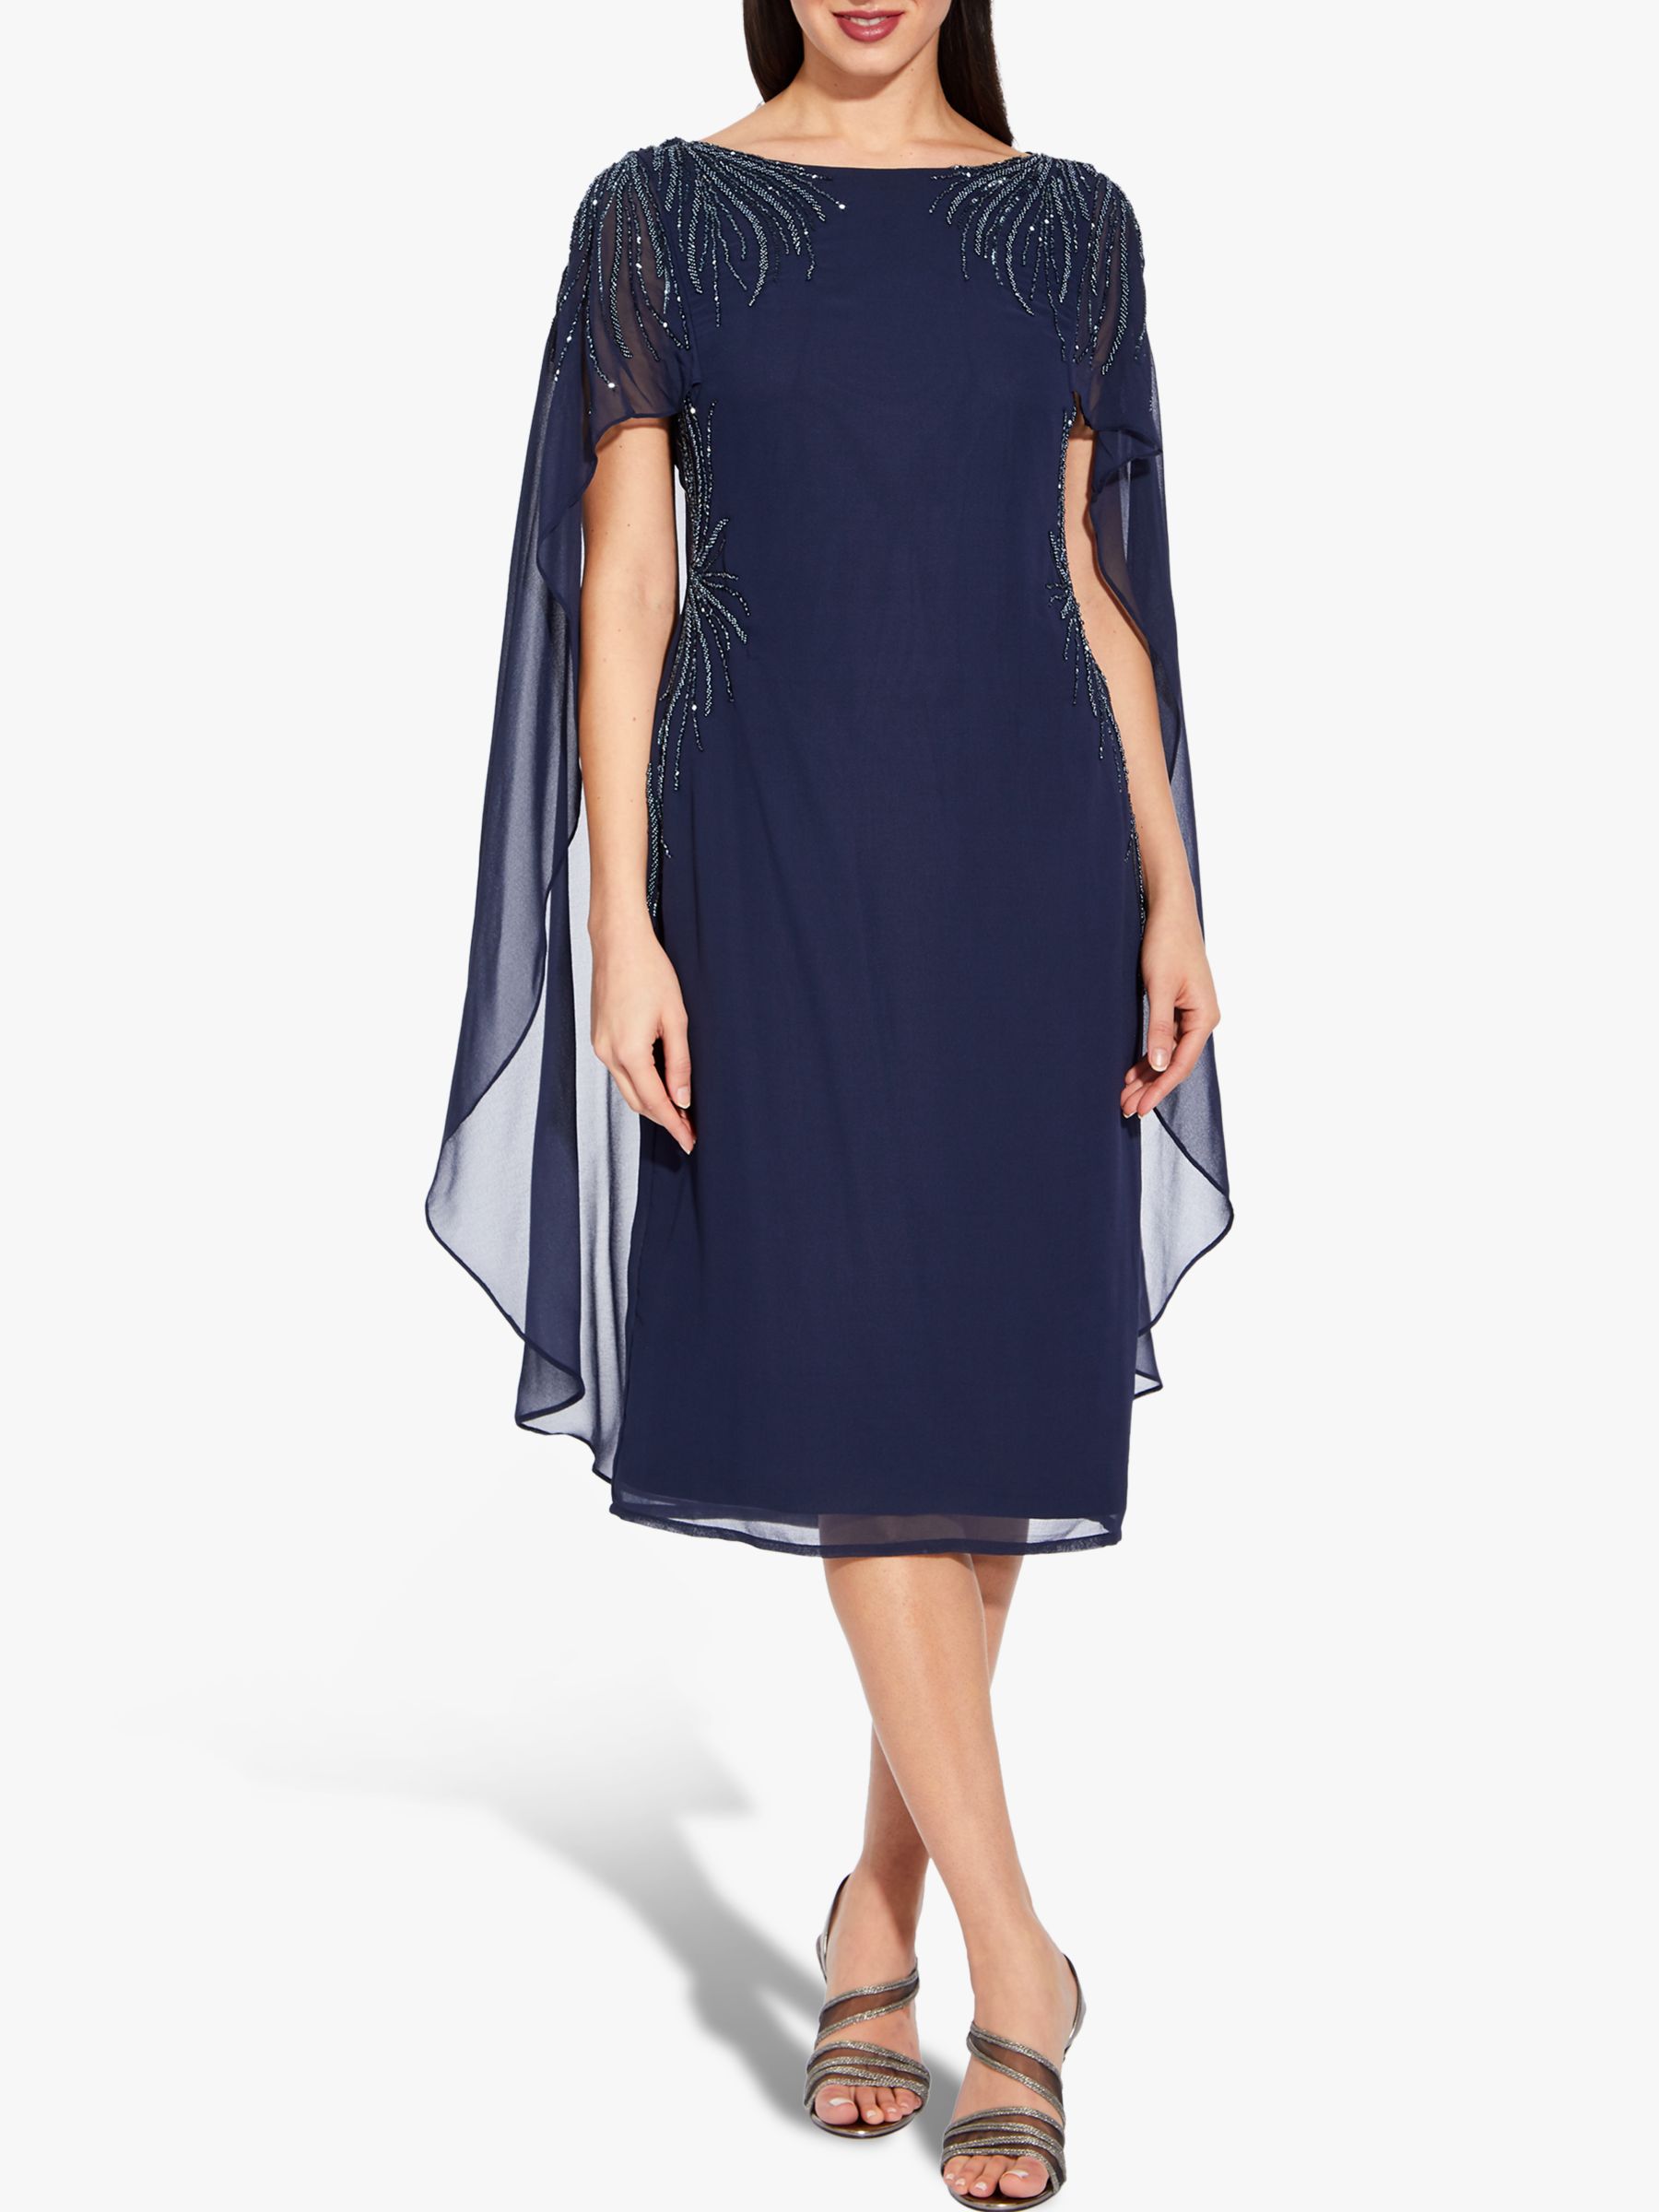 Adrianna Papell Plus Size Beaded Dress, Midnight at John Lewis & Partners